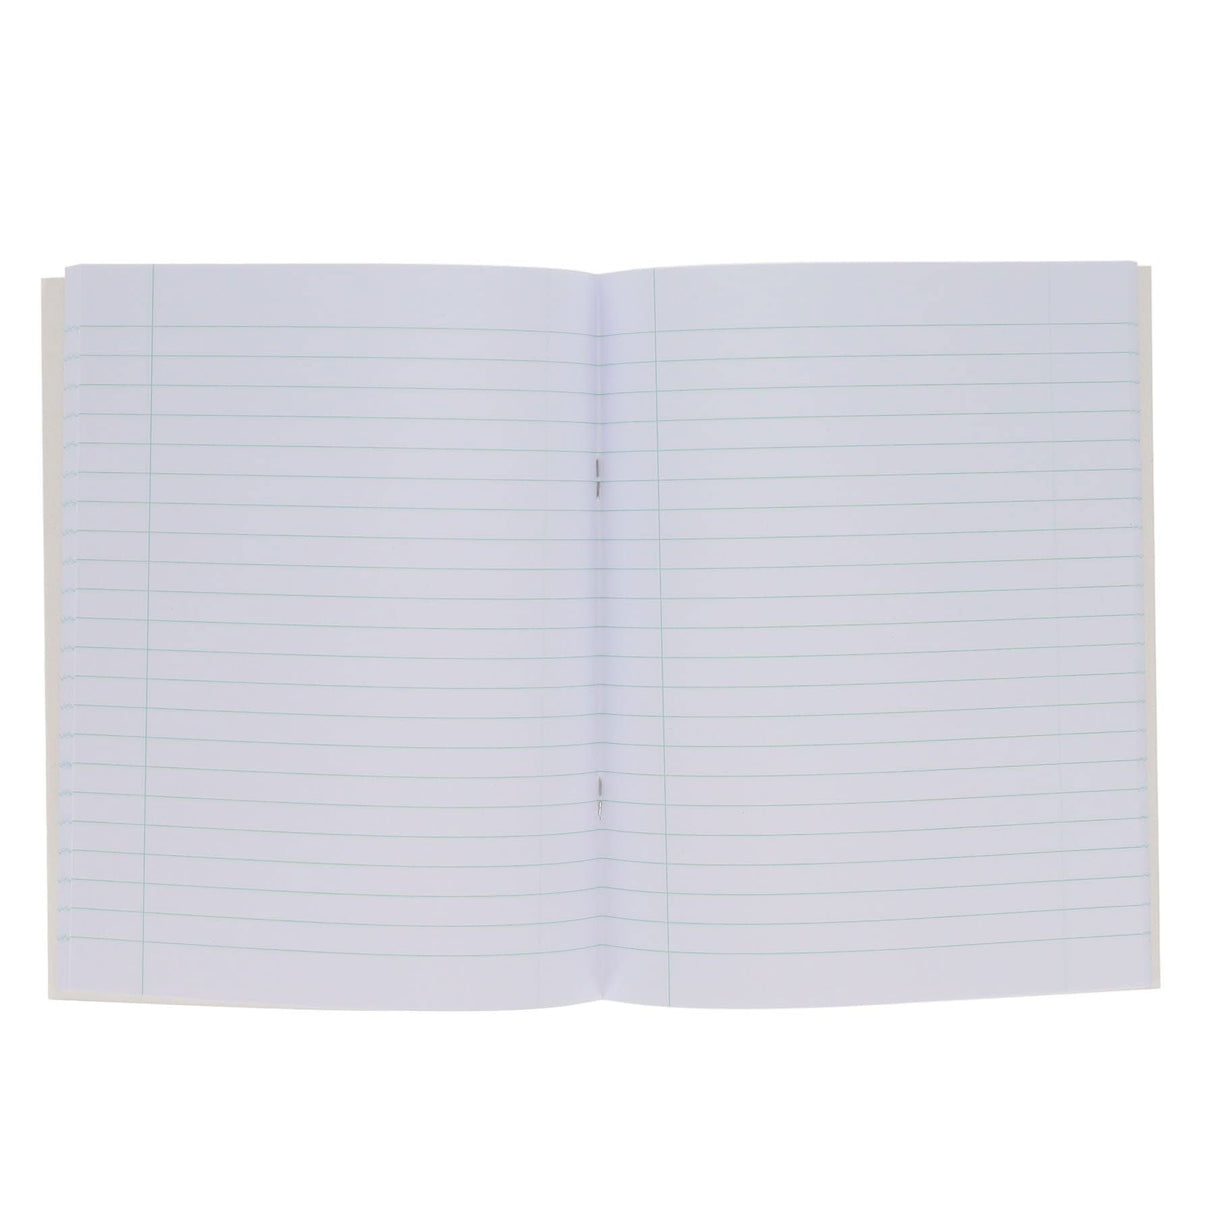 Ormond Multipack | A11 Exercise Book - Margin Ruled - 88 Pages - Pack of 10-Exercise Books-Ormond|StationeryShop.co.uk